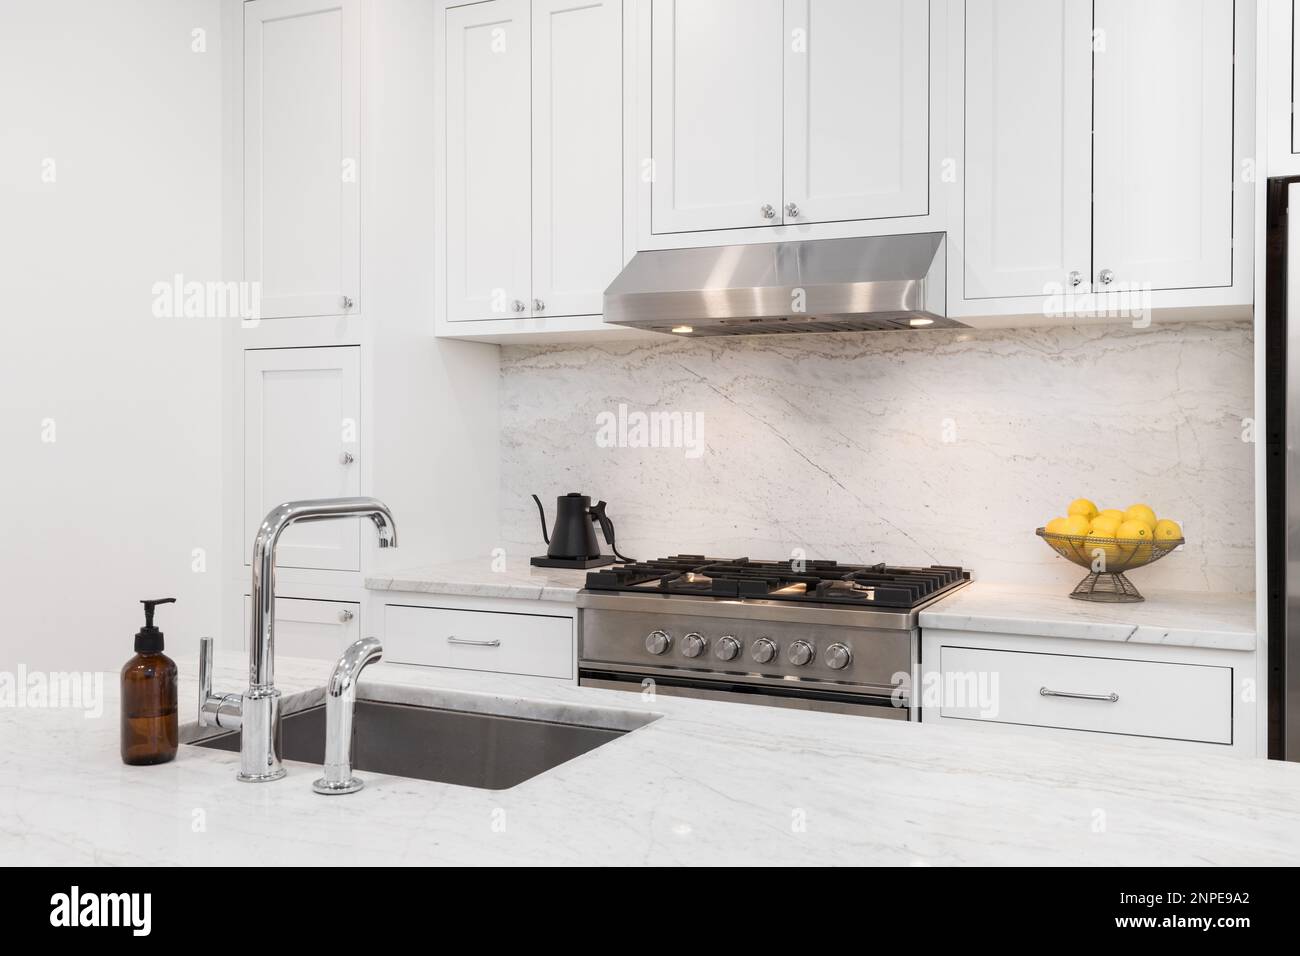 A kitchen detail with white cabinets, stainless steel stove and hood, marble countertops and backsplash, and a chrome sink. Stock Photo